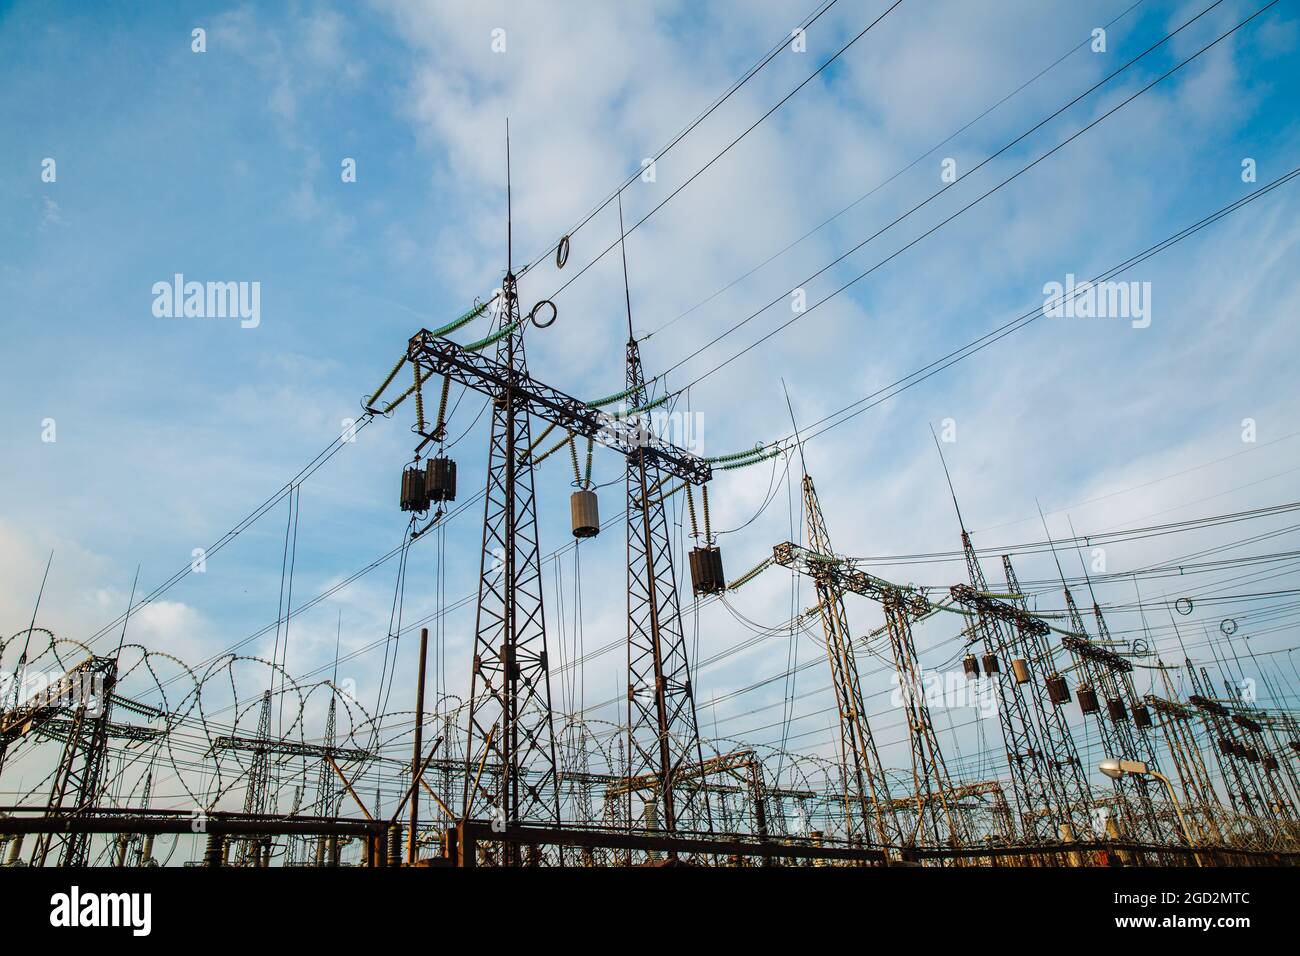 Electrical pylons and high voltage power lines are behind a barbed wire fence. Stock Photo